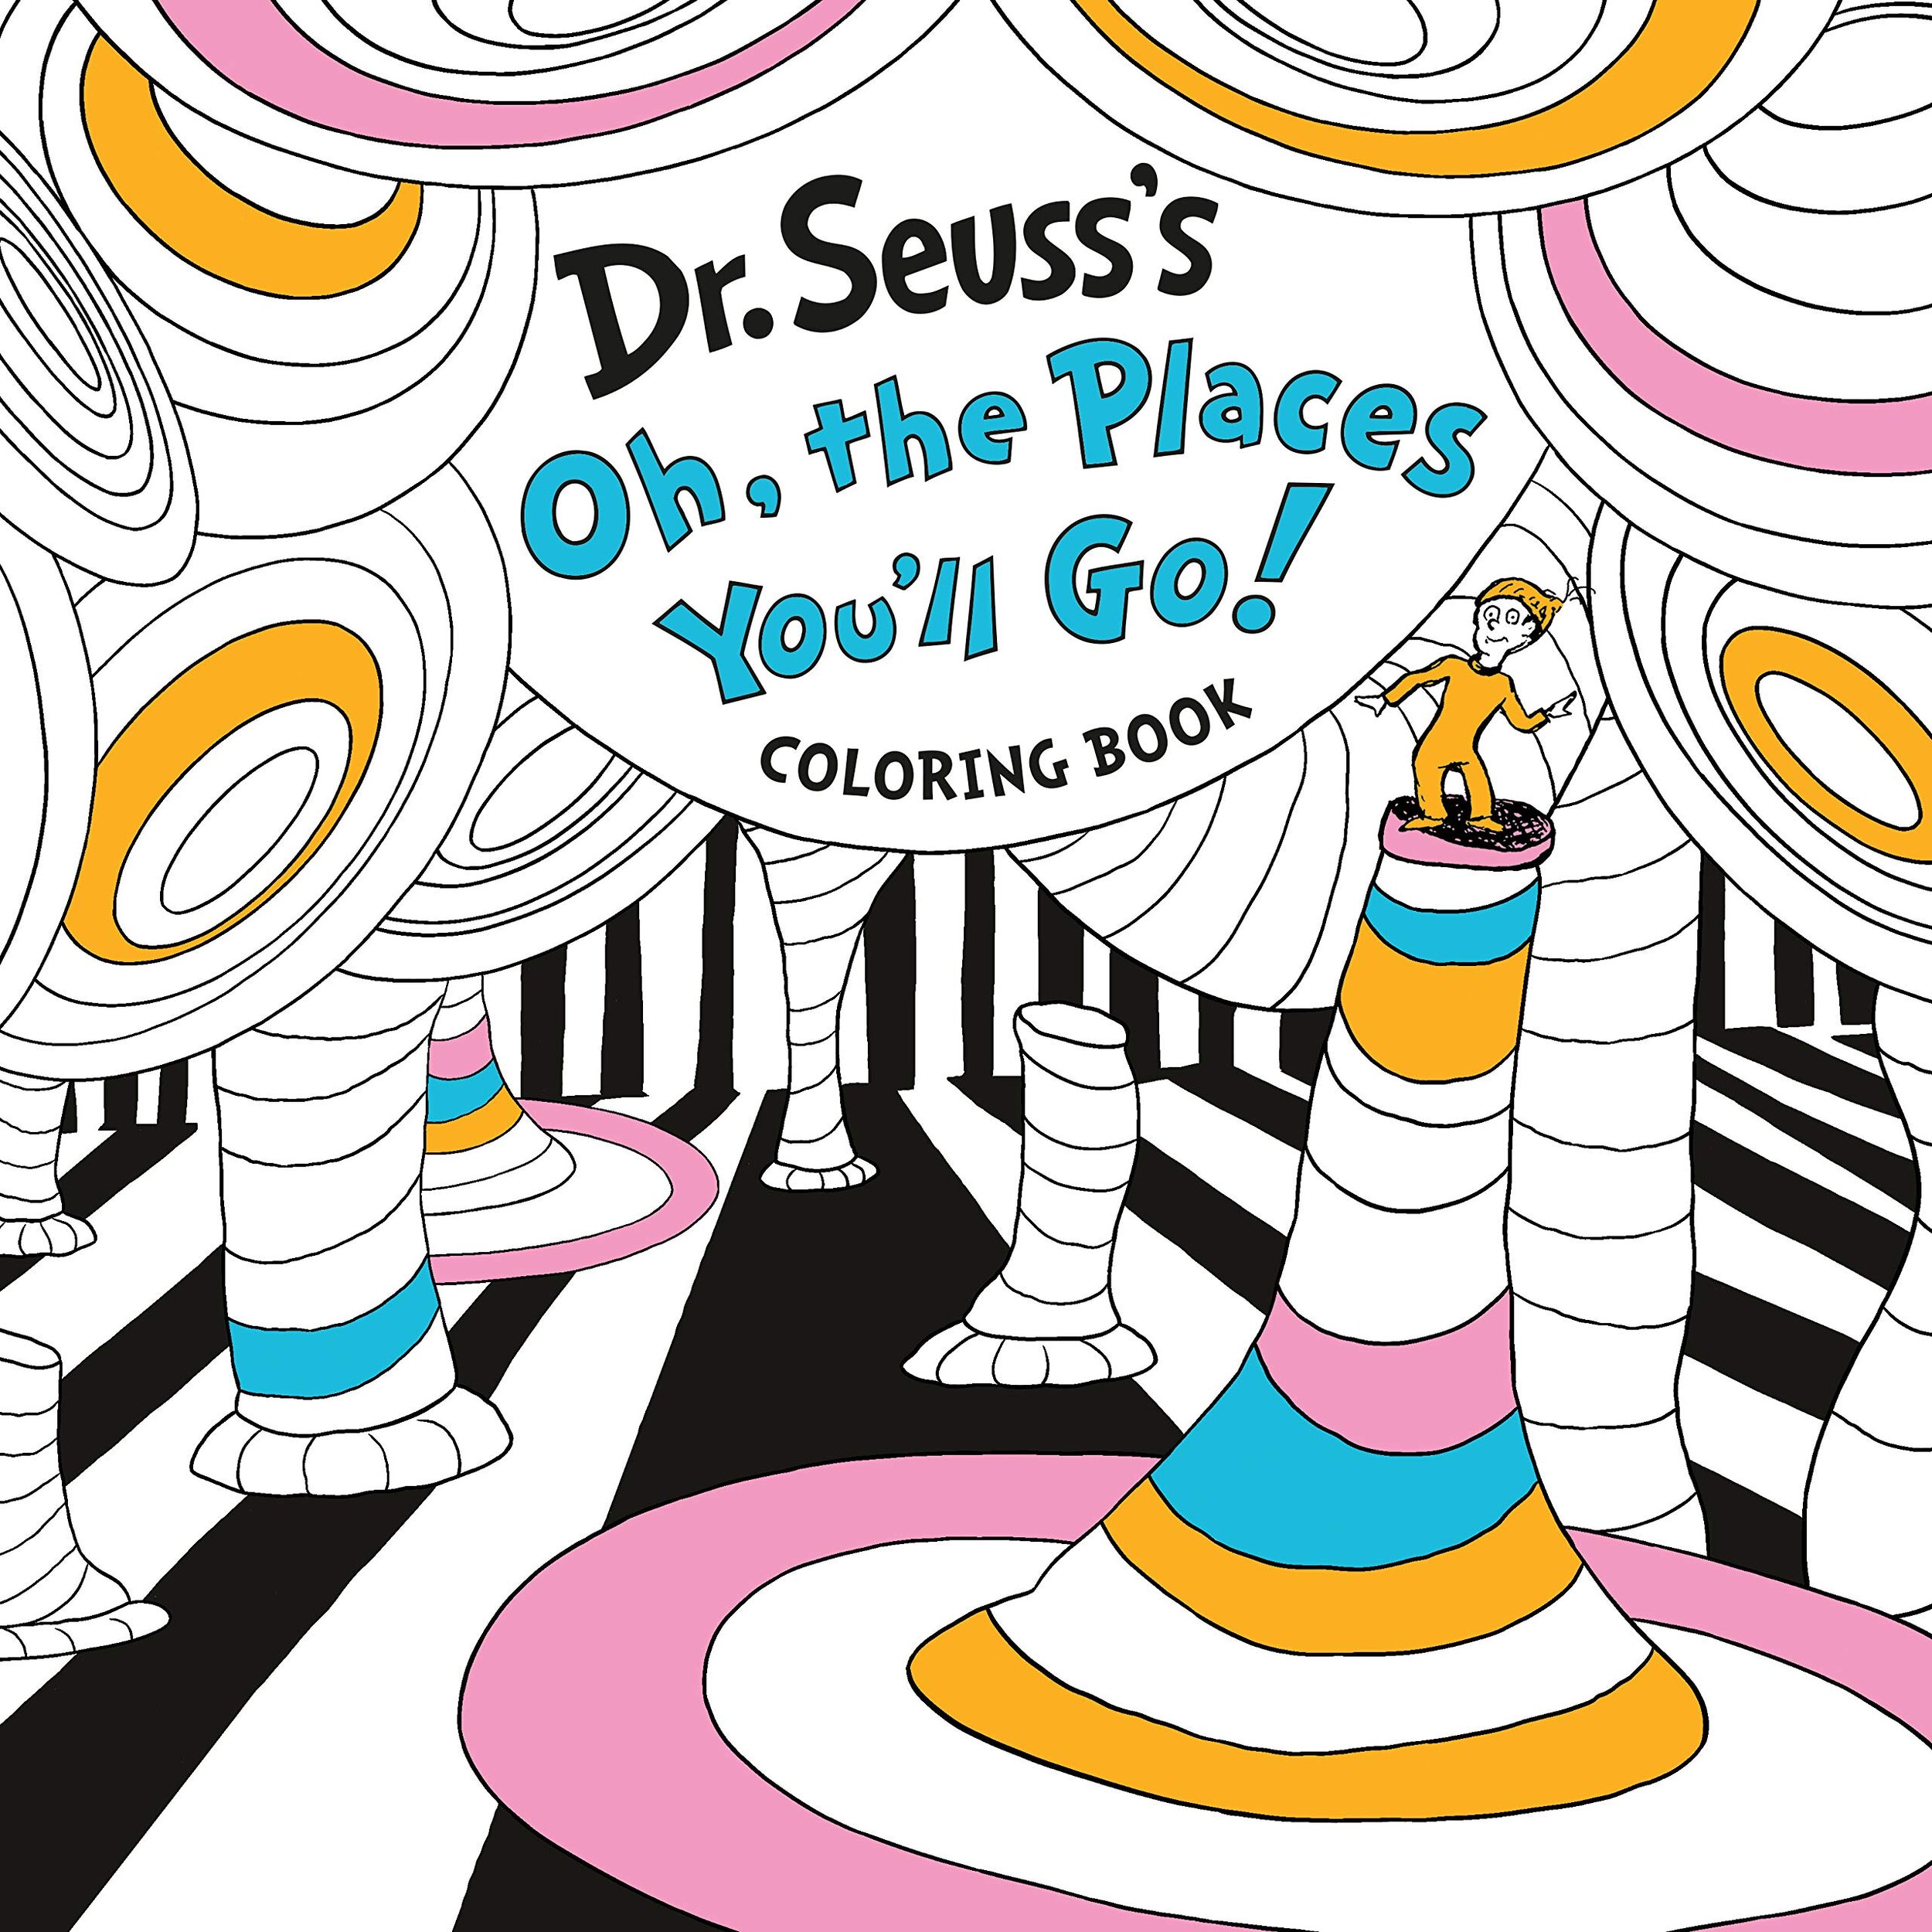 Dr Seuss S Oh The Places You Ll Go Coloring Book The Bookshelf In Thomasville Georgia